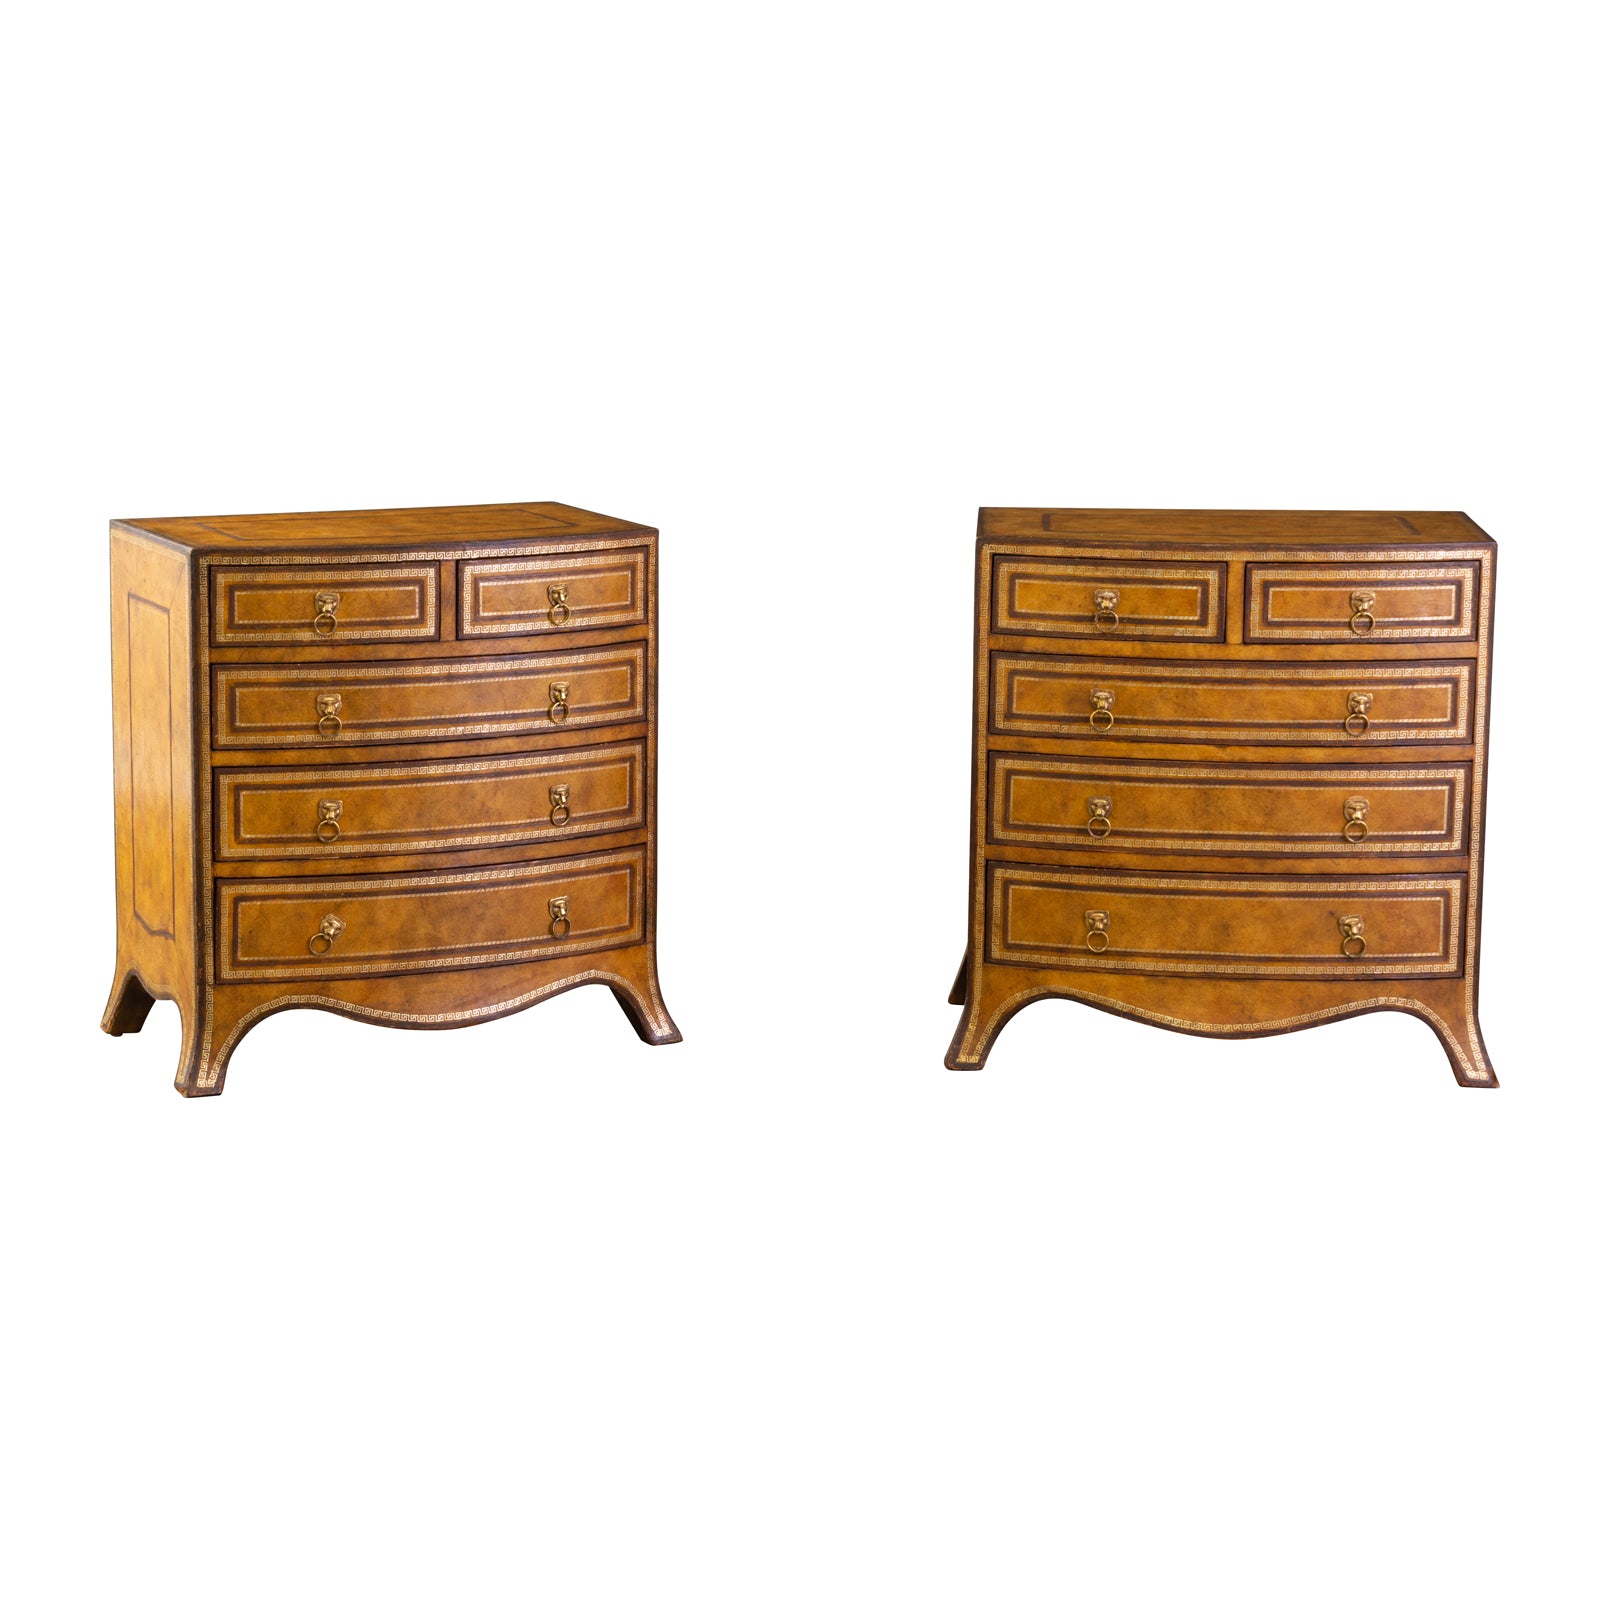 Pair of Embossed Leather Bedside Tables Tables in the Regency Taste by Maitland Smith